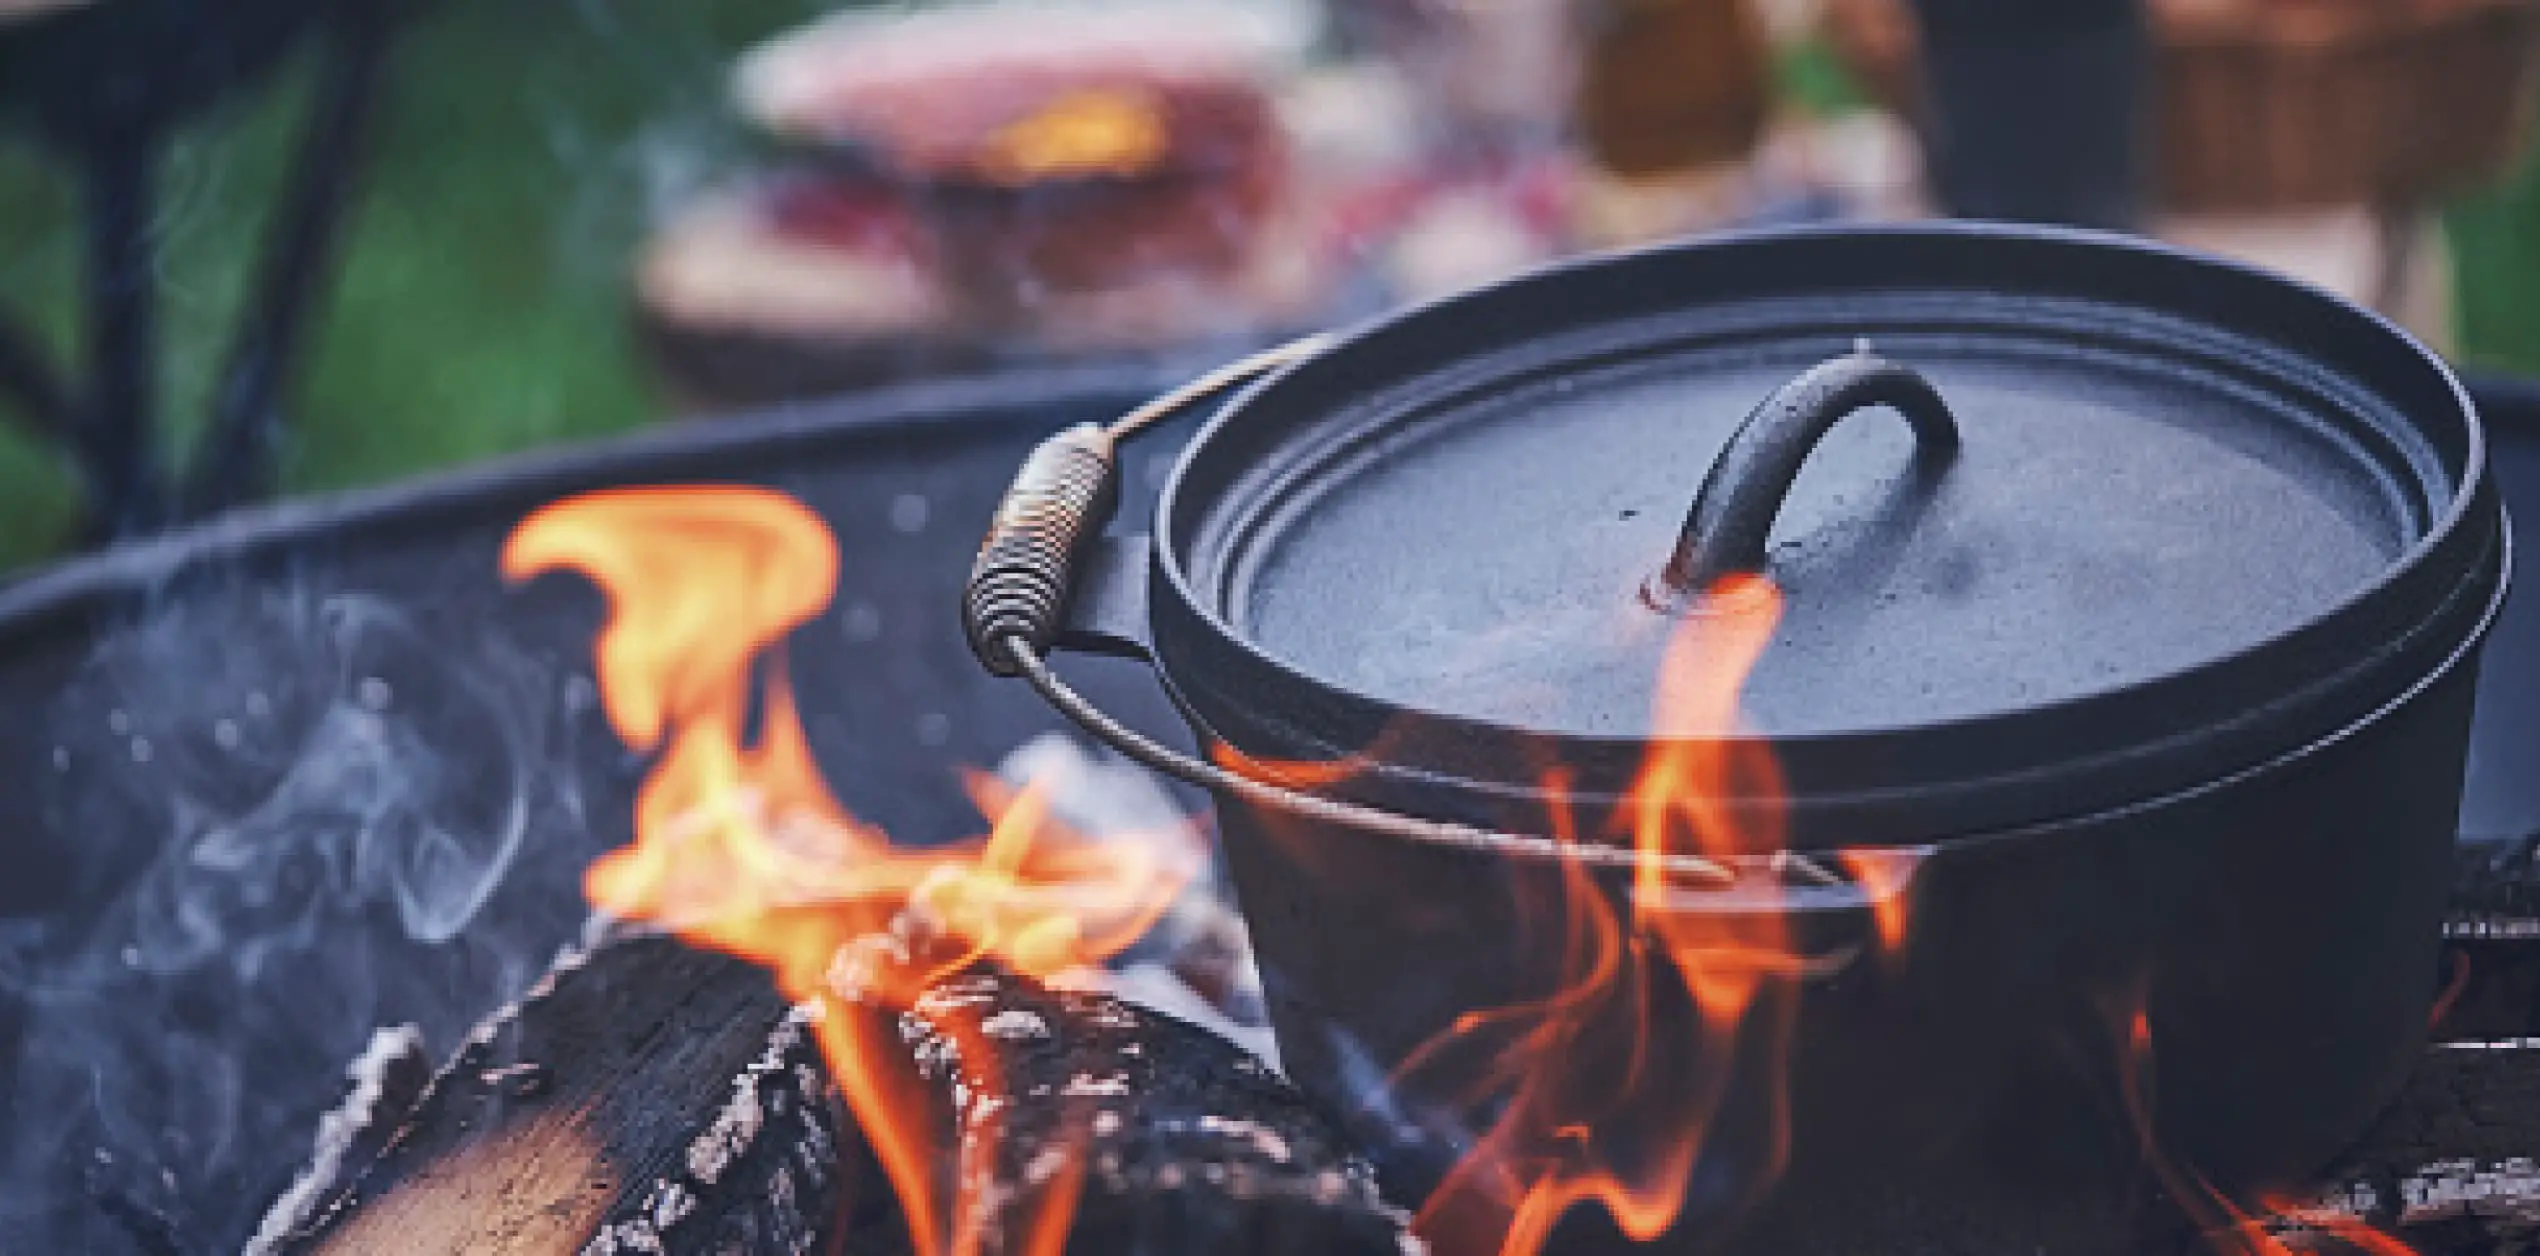 What Can You Cook in a Dutch Oven?